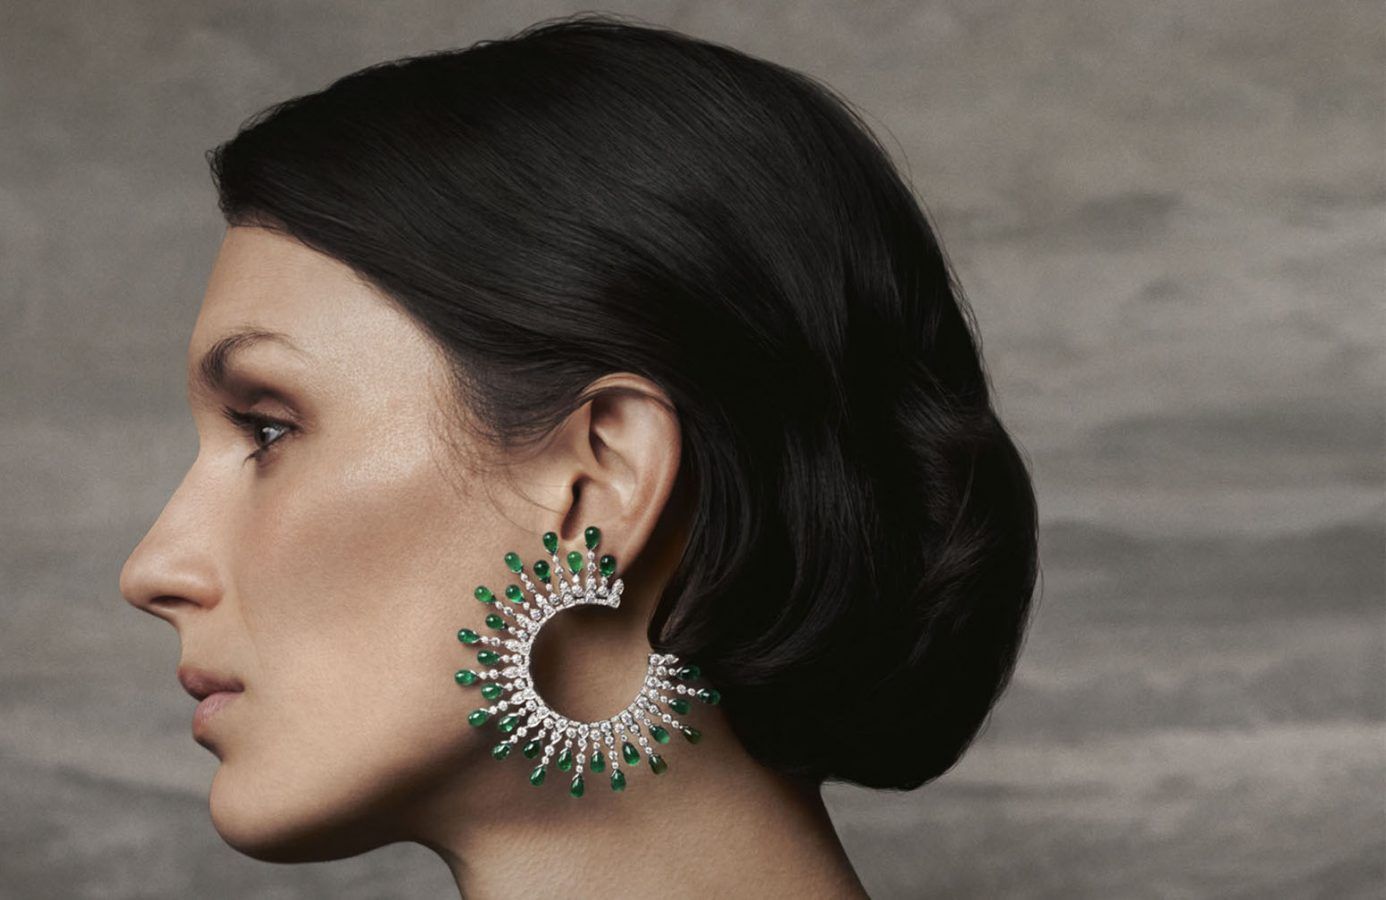 Boucheron’s Artistic Director Claire Choisne on Reinventing The Iconic Maharajahs Collection